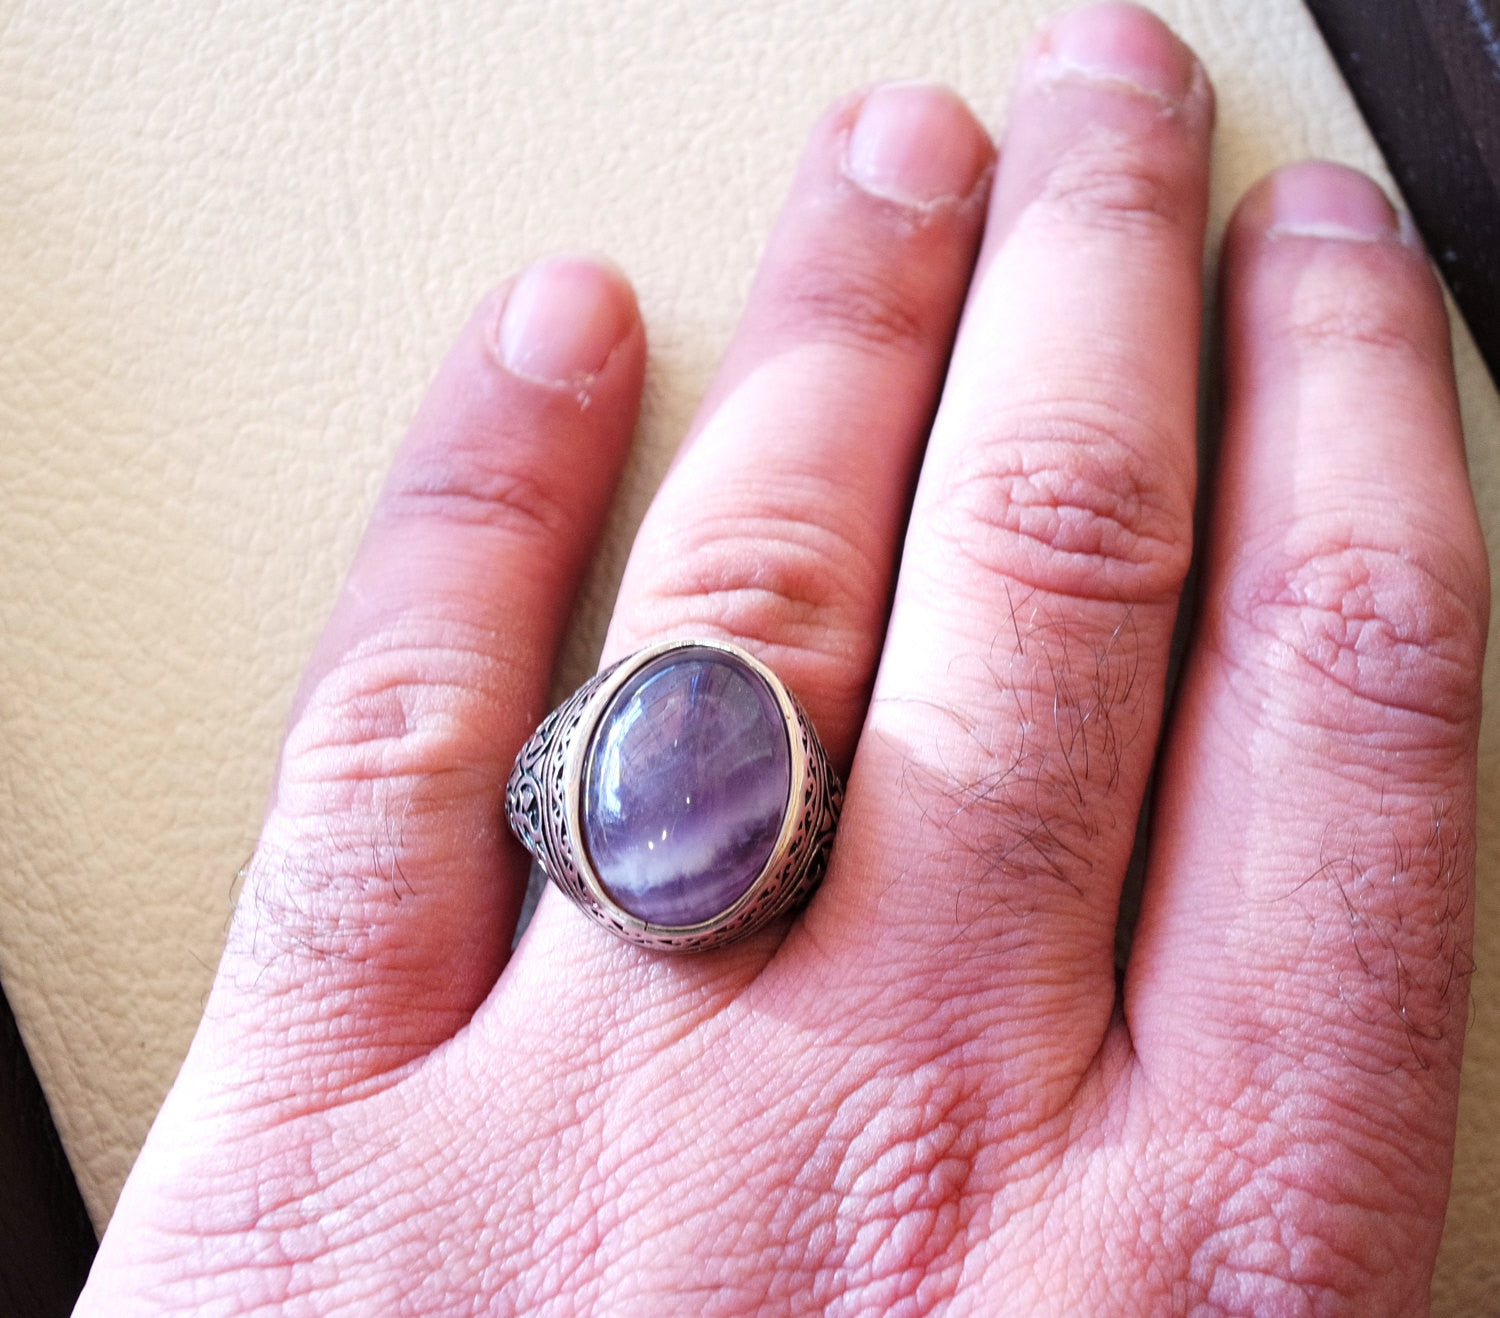 amethyst agate natural purple stone sterling silver 925 man ring vintage arabic turkish ottoman style jewelry oval  gem all sizes express